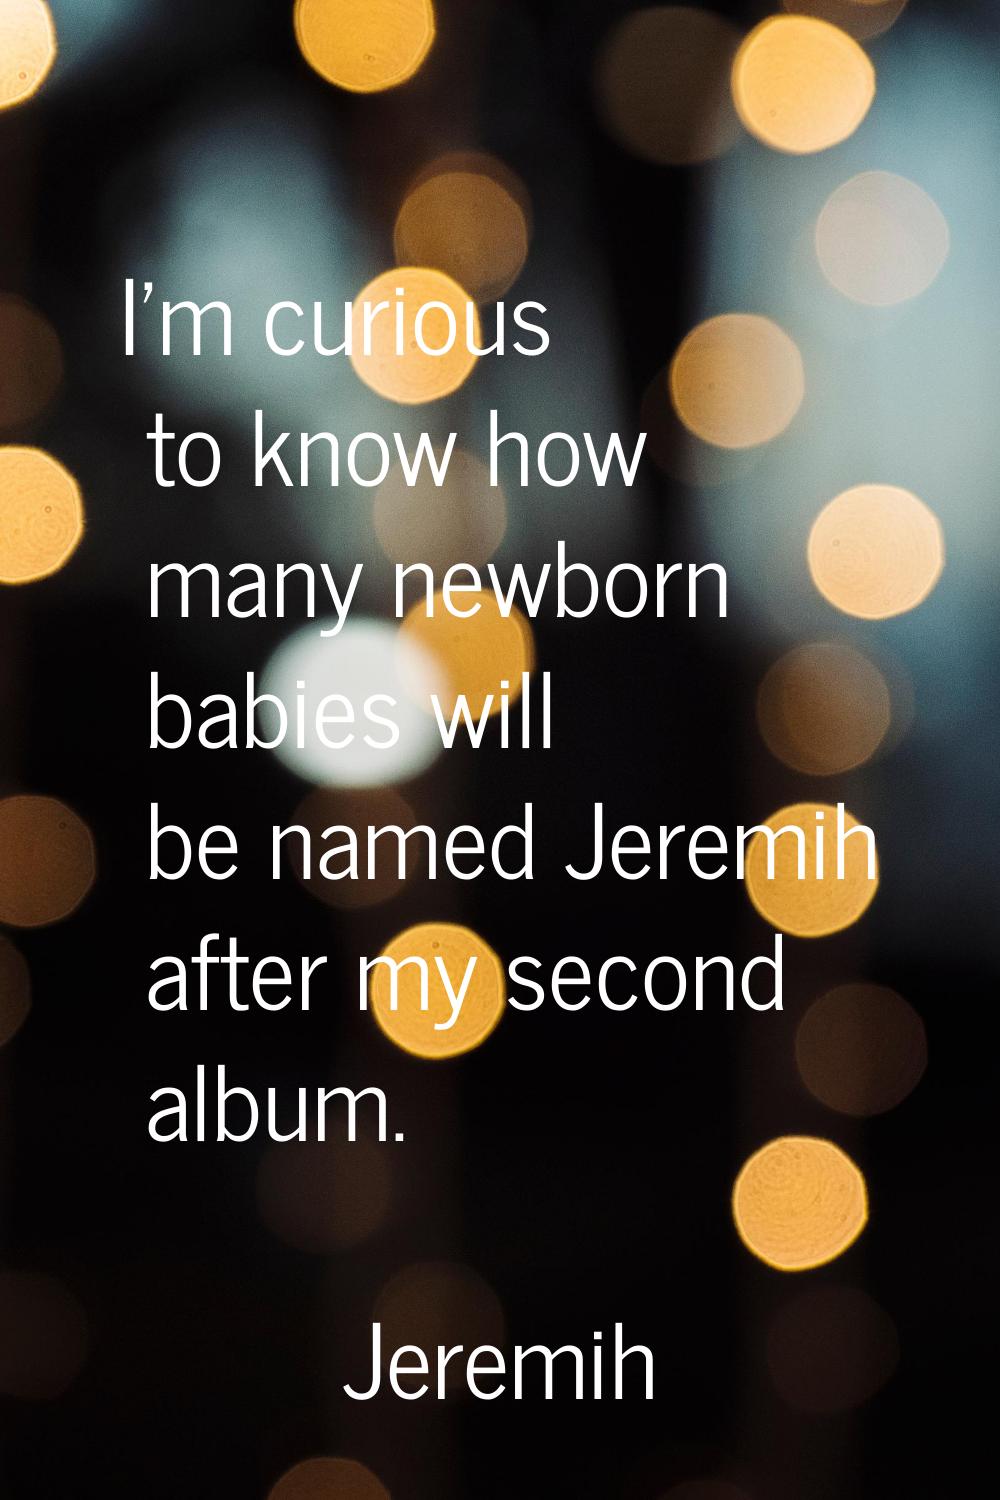 I'm curious to know how many newborn babies will be named Jeremih after my second album.